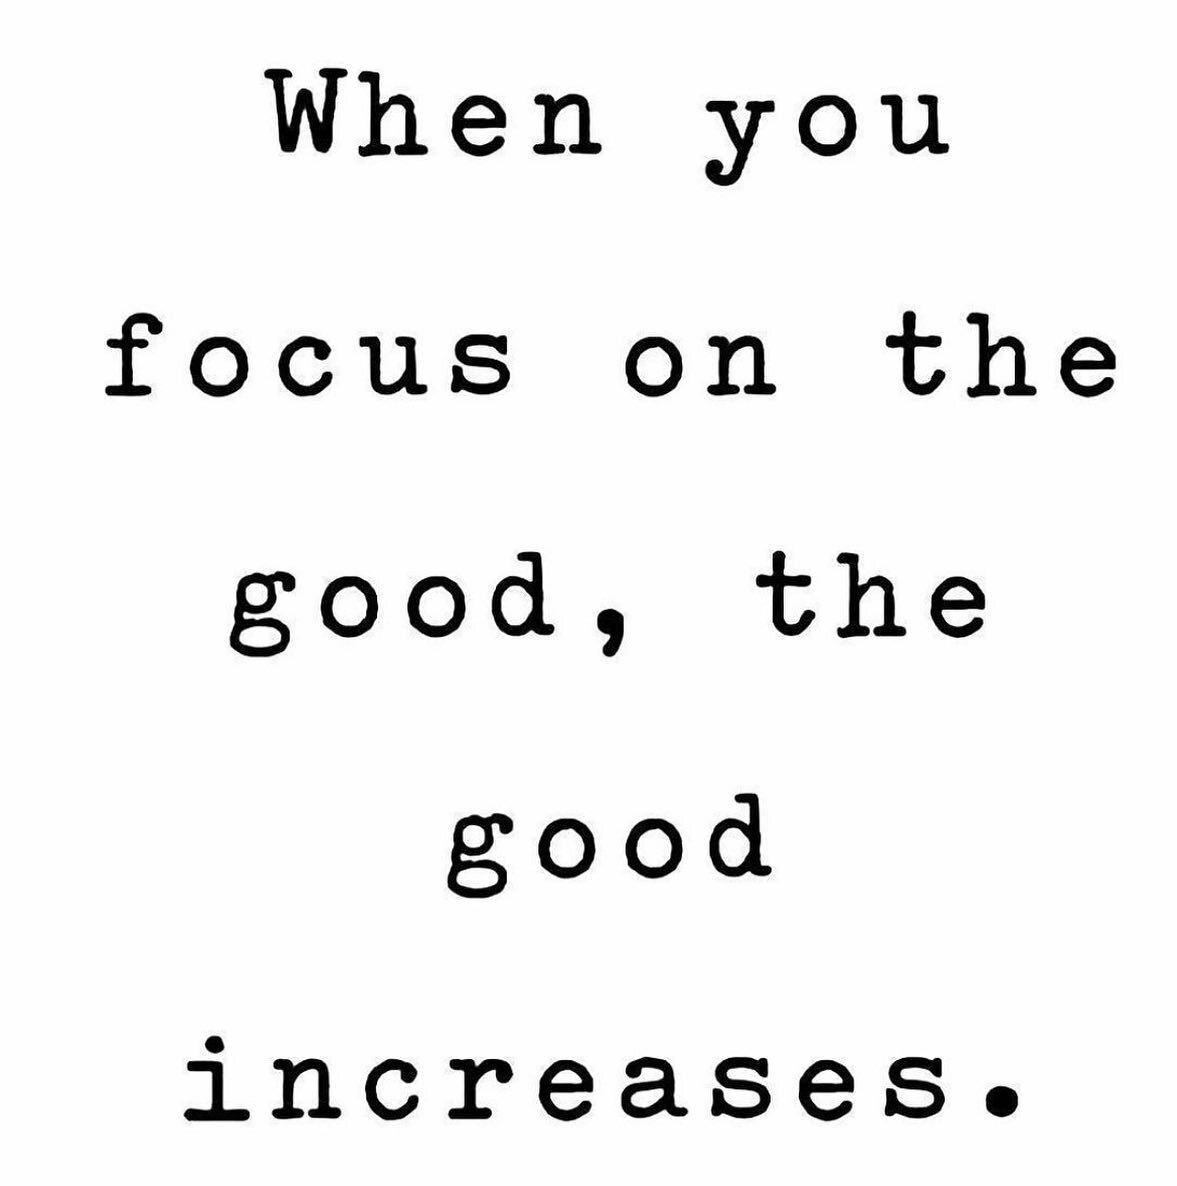 What good things have you been focusing on lately? ✨

#focusonthegood #manifestation #presentmoment #hereandnow #goodvibes #houstonyogastudio #selfcare #mentalhealth #houstonyogastudio #houstonyogis #soultribeshtx #houstonyoga #houstonmeditation #hou